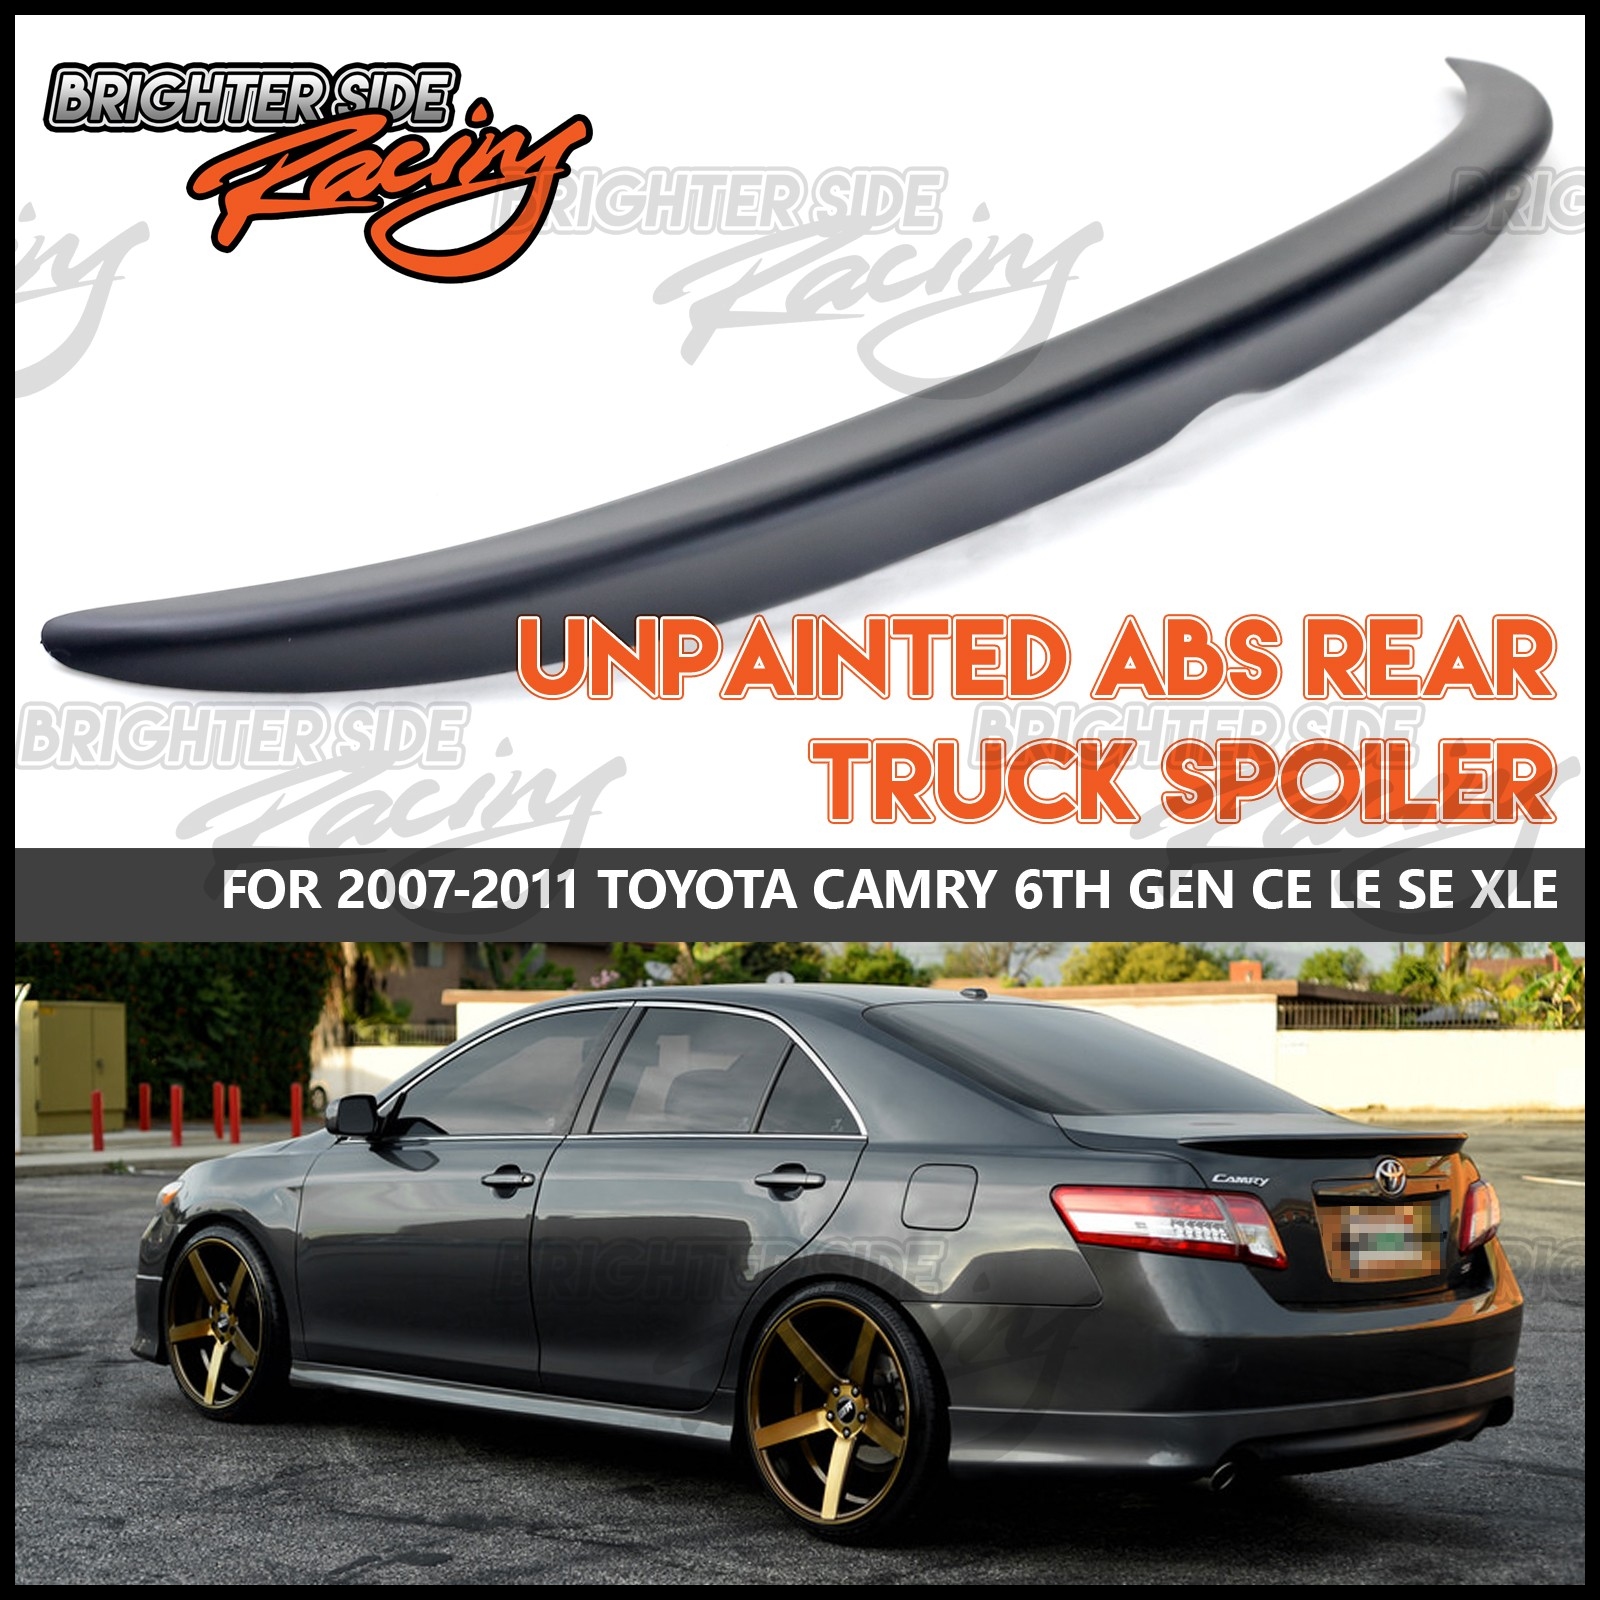 Quantity 1 set of wing spoiler for 07 11 Toyota Camry